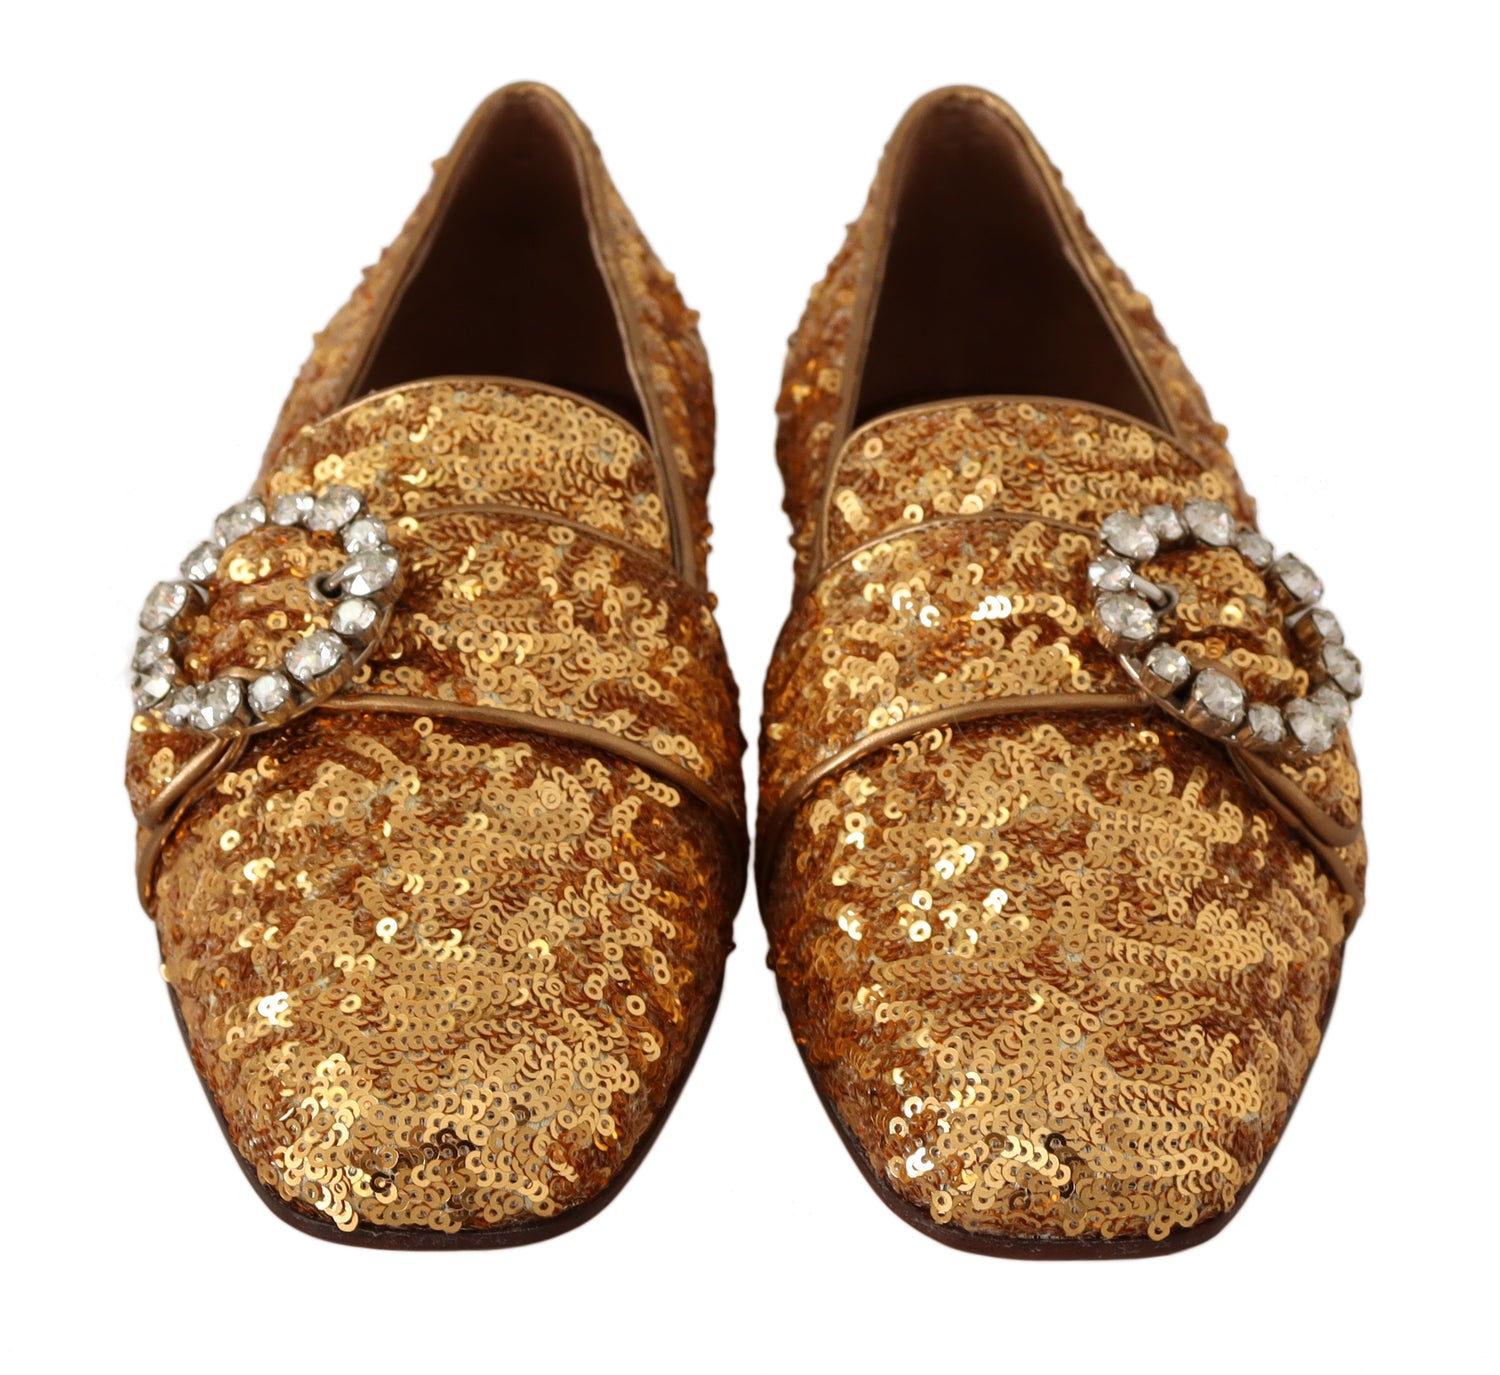 Gold Sequin Crystal Flat Women Loafers Shoes